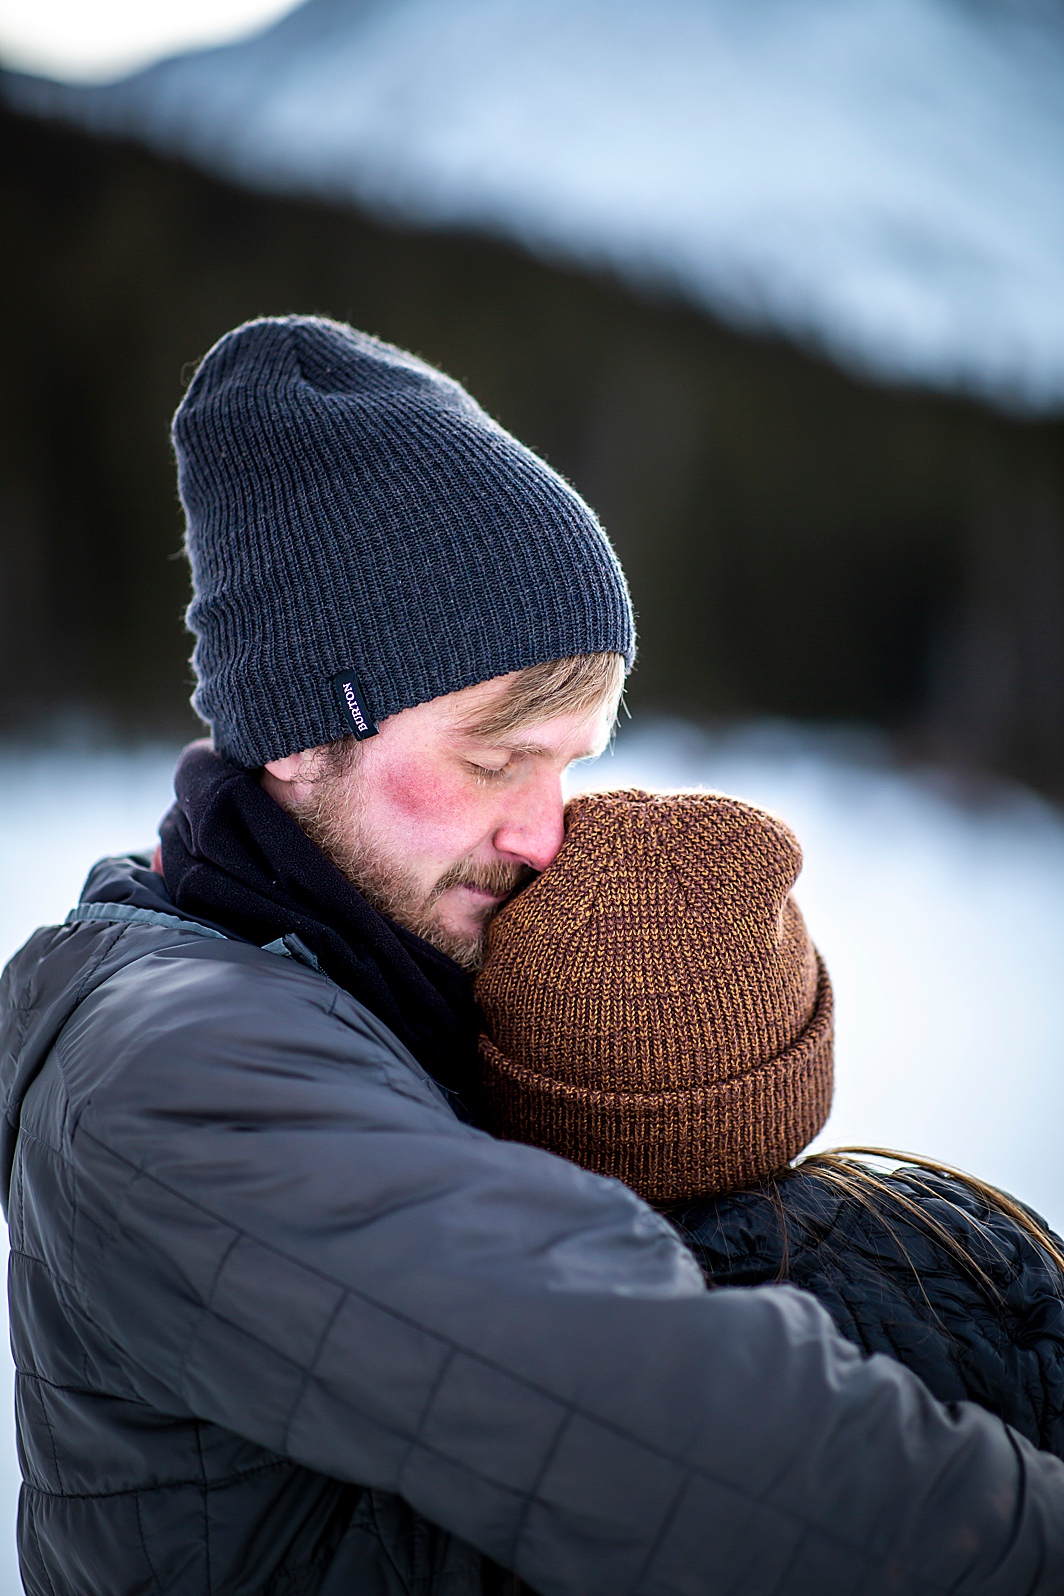 Cute couple photo of man hugging woman in the snow during their winter engagement session in Breckenridge, Colorado taken by Hillary Shedd Photography, Colorado Wedding Photographer.